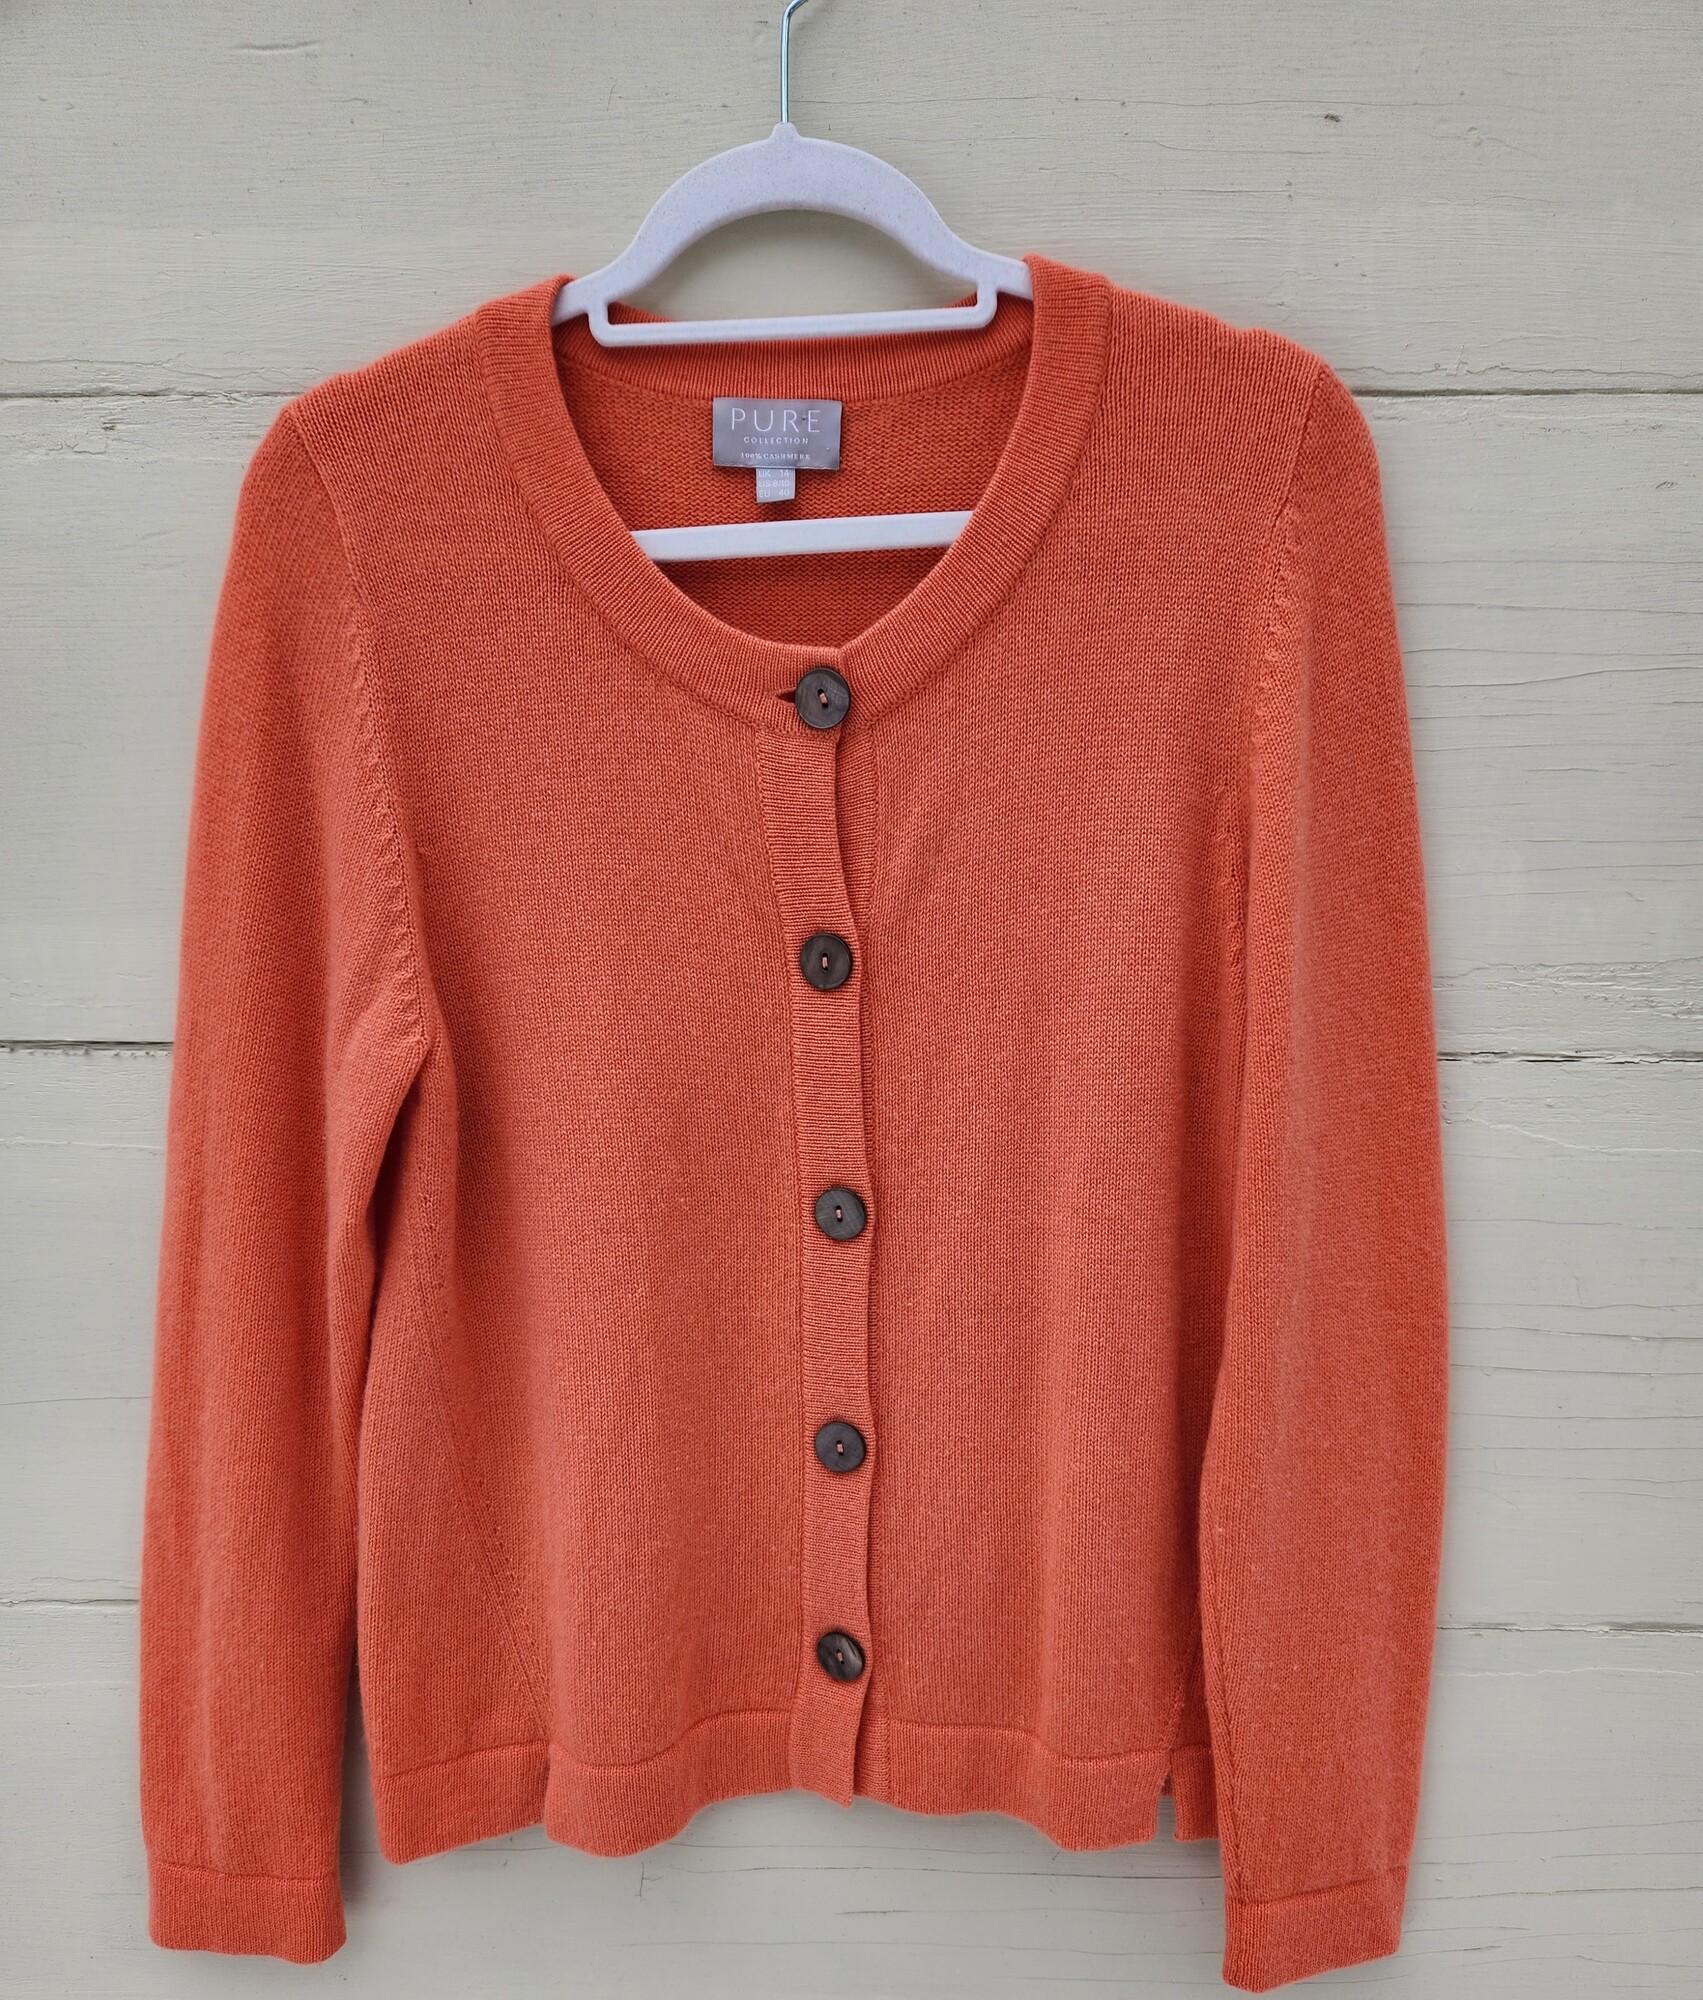 Pure Color Cashmere Tangerine Button Down Cardigan Size 8/10 US - 14 UK - EU 40
Pit to Pit 19 inches across
Pit down Sleeve 17.5 inches
Waist 18.5 inches across
down the back 23.5 inches
EUC
Retail $600